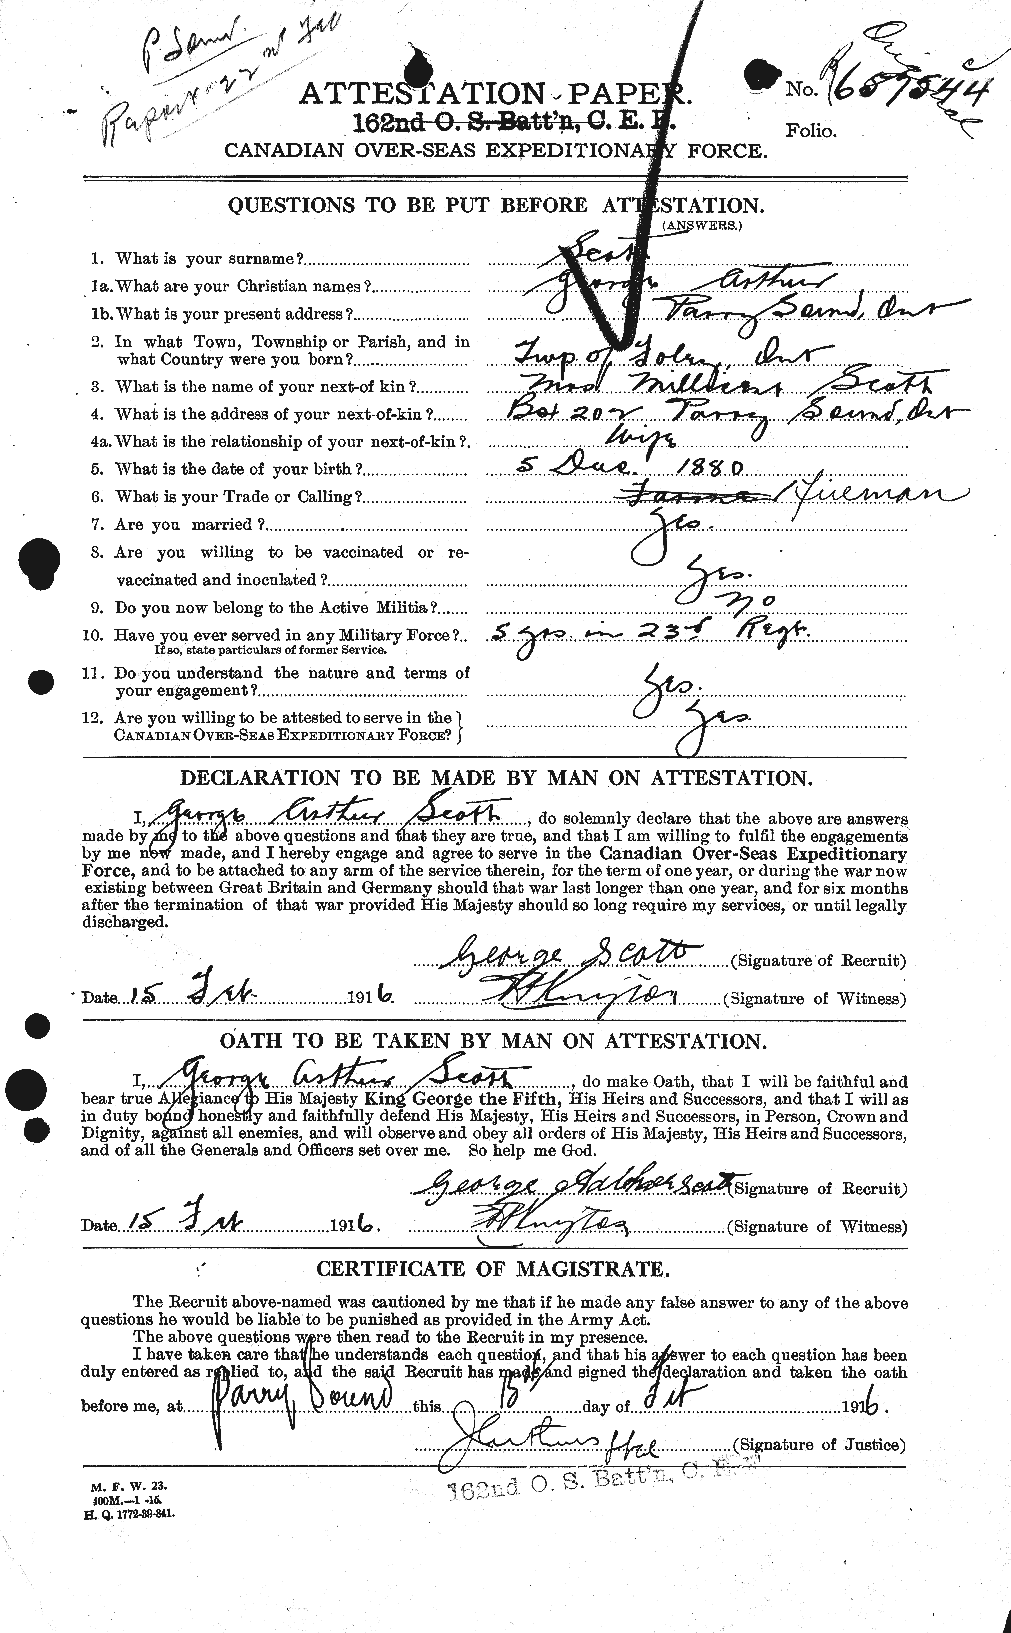 Personnel Records of the First World War - CEF 083572a